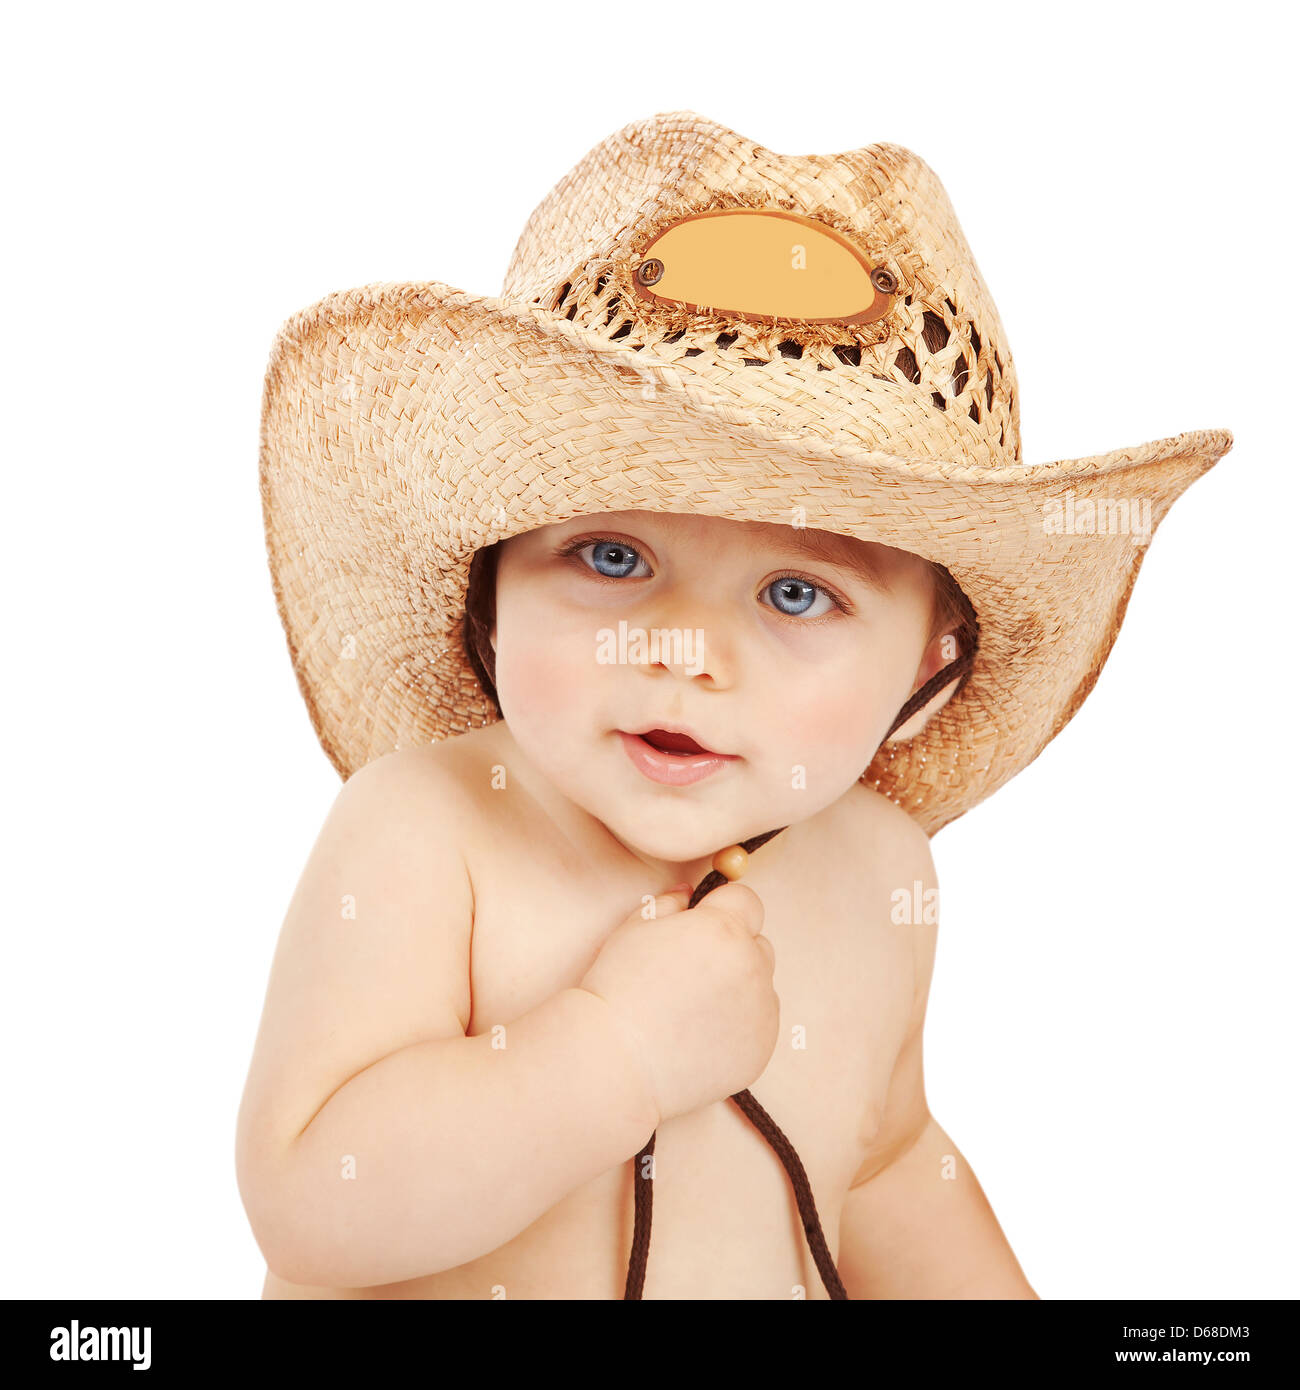 Cute baby boy wearing big cowboy hat isolated on white background, adorable child having fun indoors, happy childhood Stock Photo